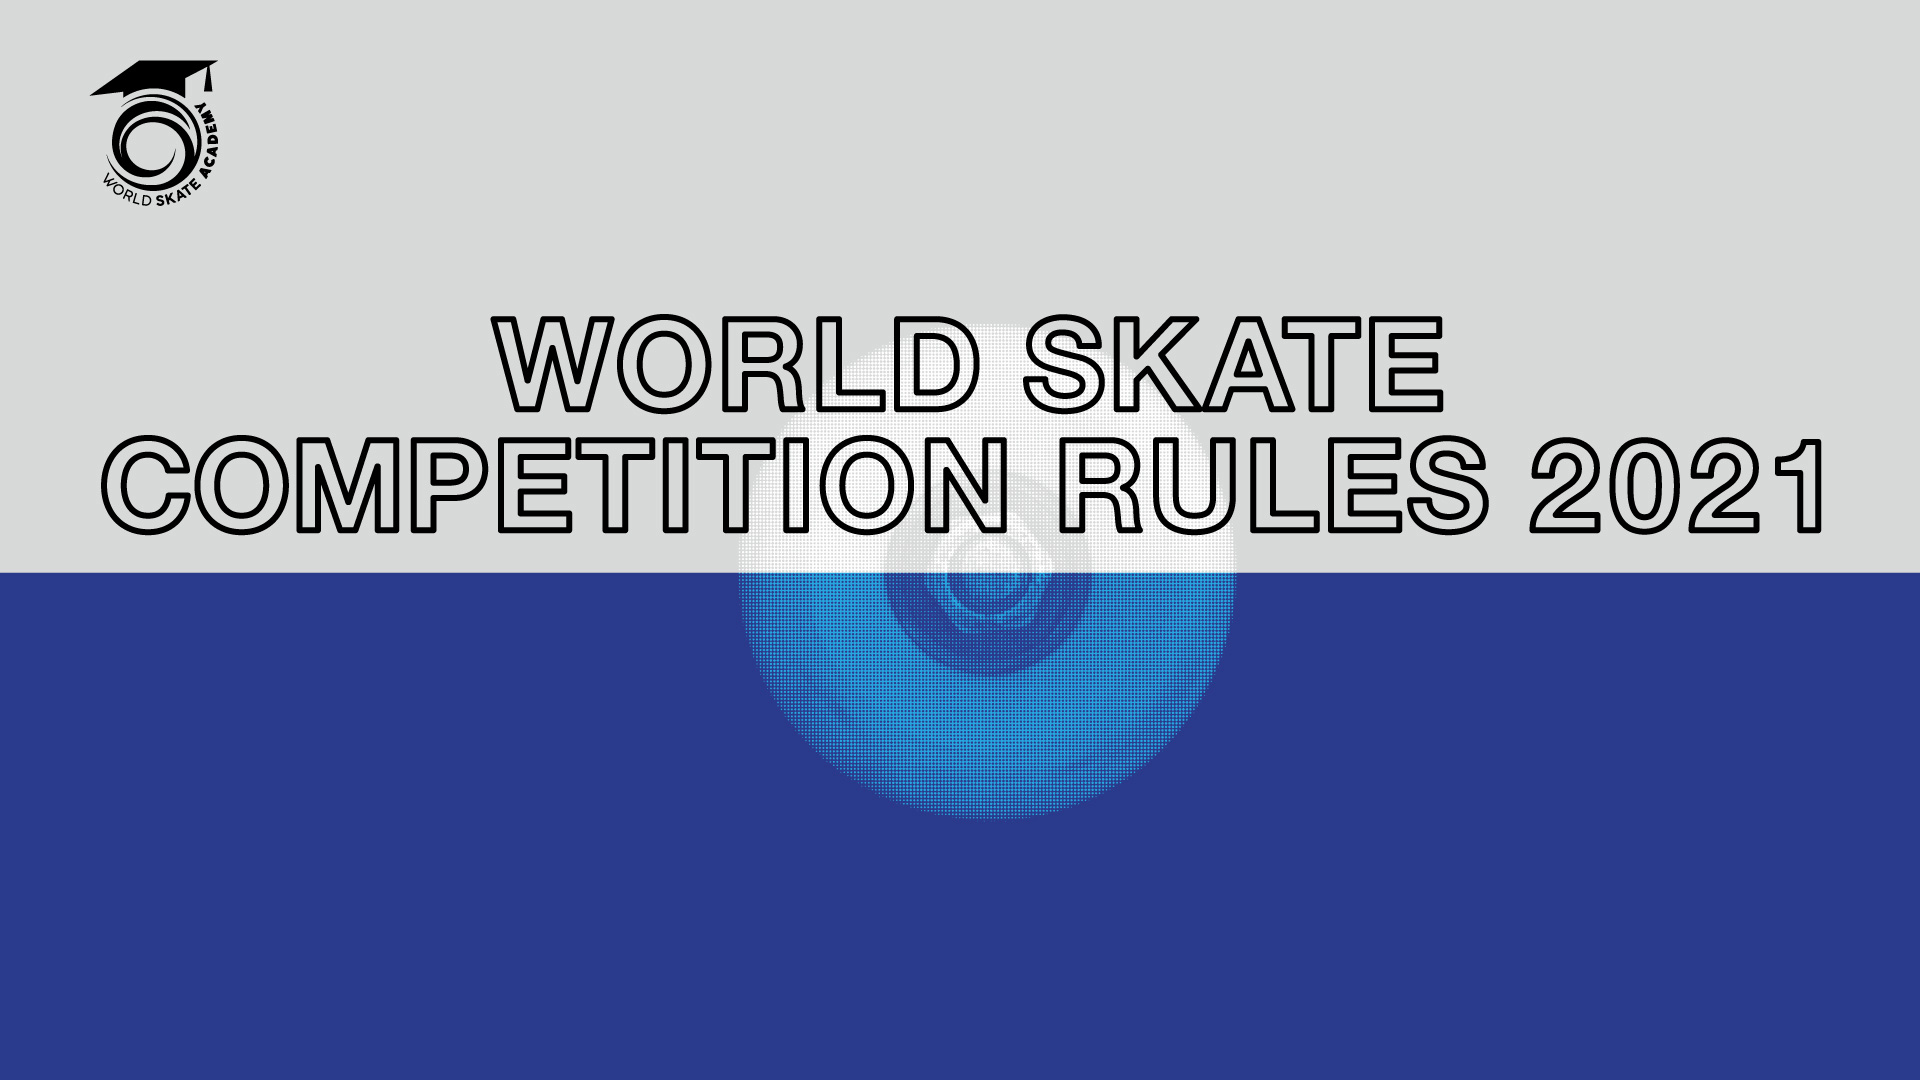 images/World_Skate_Competition_Rules_2021/COMPETITION_SUBJECT_1920_1080.jpg